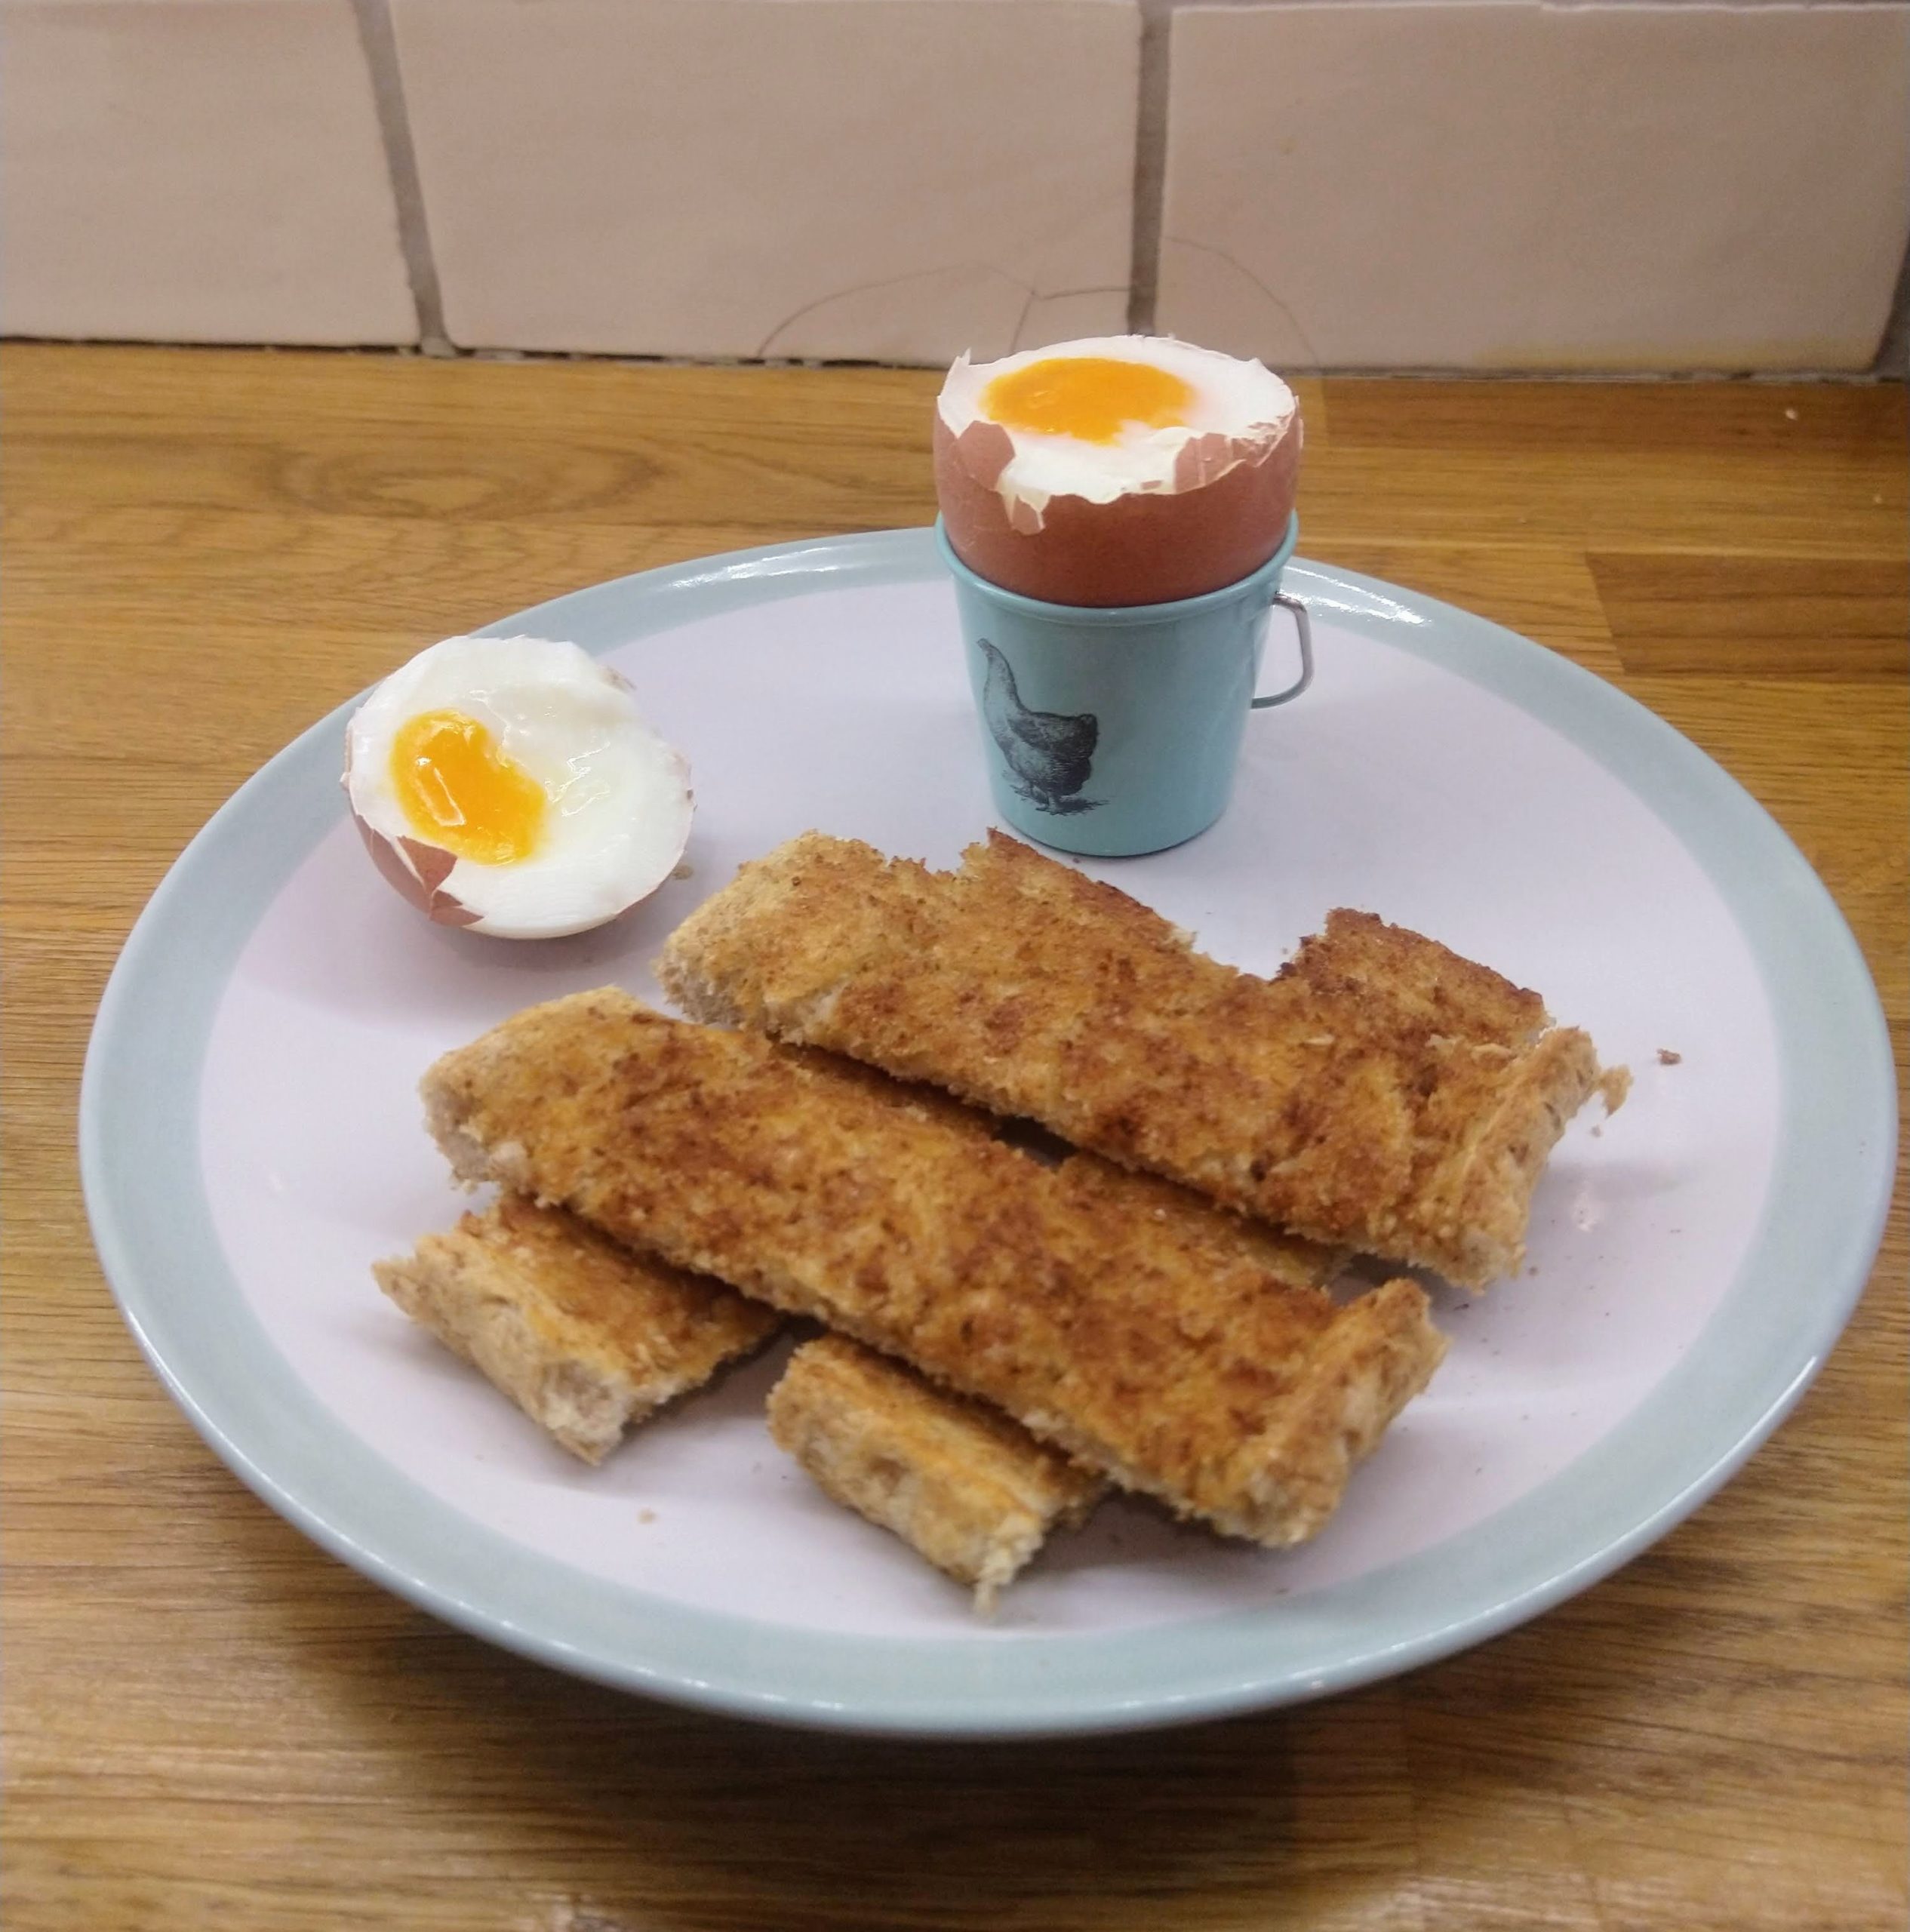 Soft boiled egg ina egg cup with toast. Cooked in a instant pot